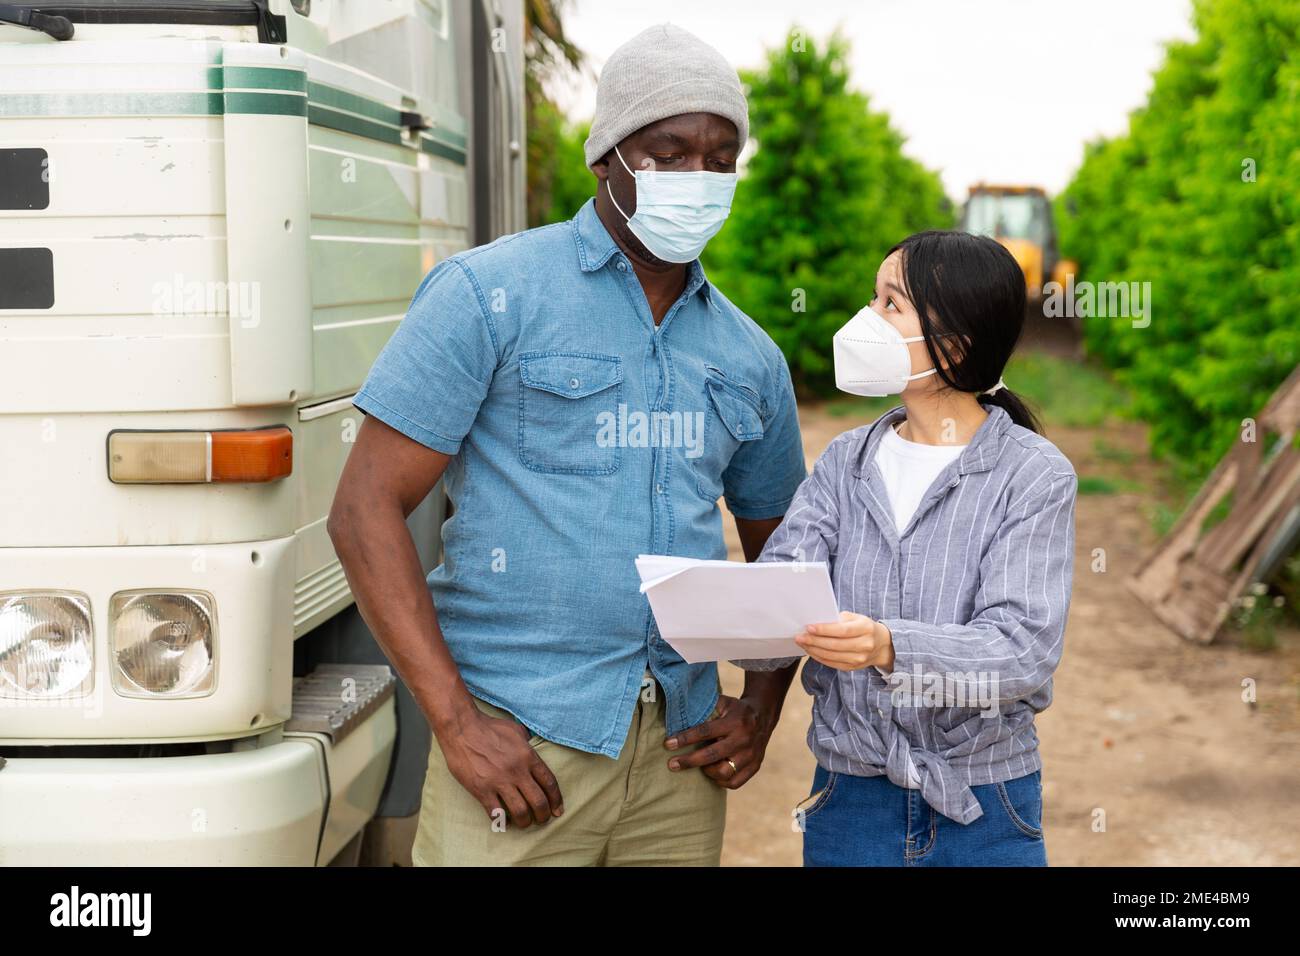 People near truck with mask Stock Photo